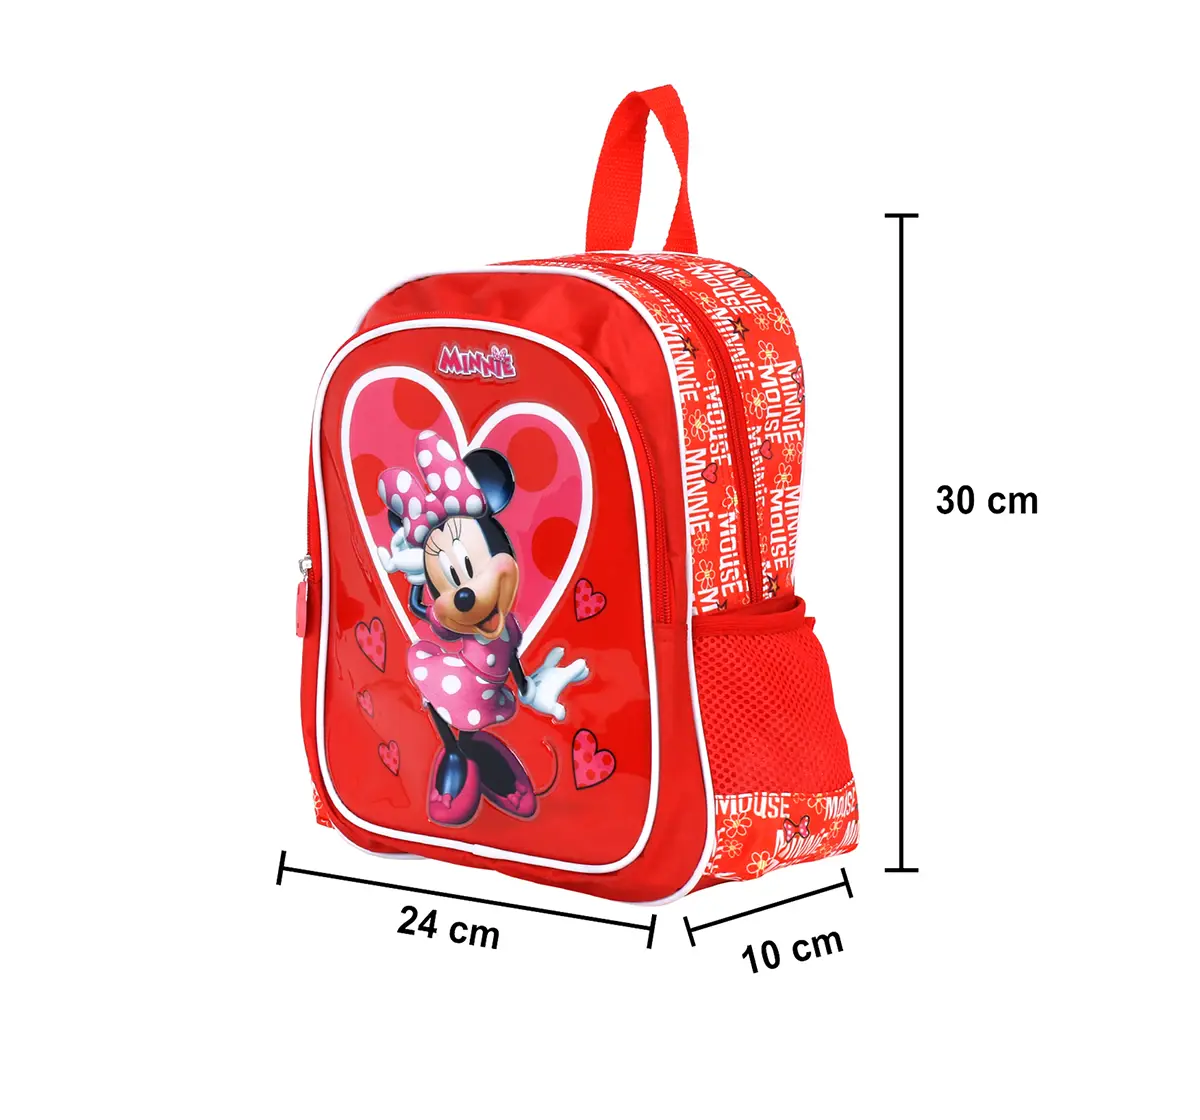 Disney Minnie Heart 12 Backpack Bags for age 3Y+ 